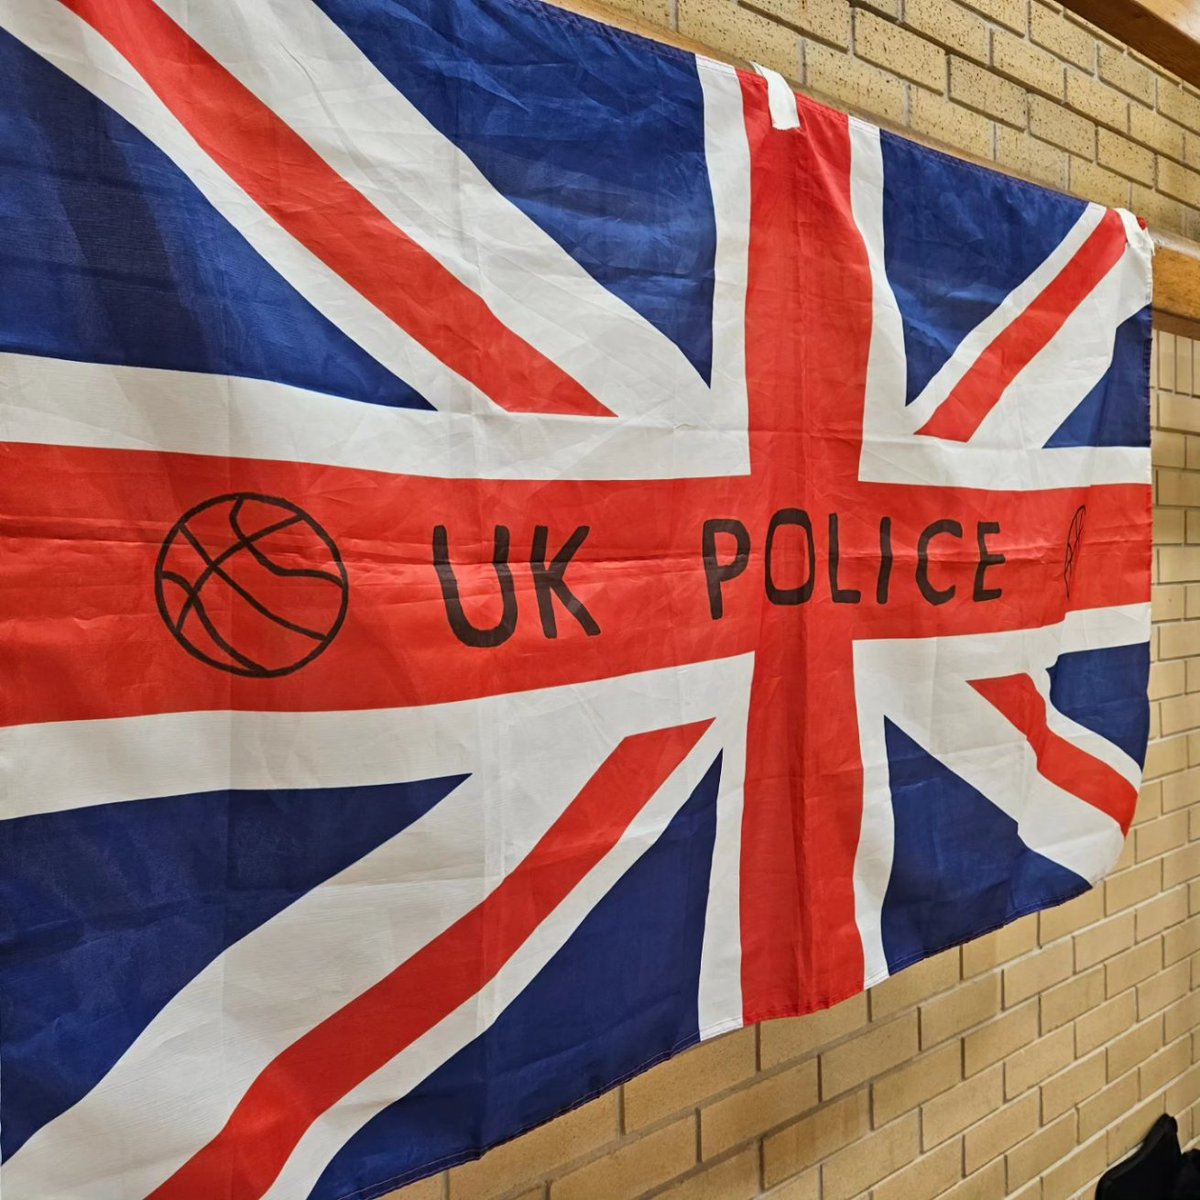 Squad came together today for another training camp @westmerciapolice HQ.

Successful session and another one is in the bag on the road to @uspe_sport European qualifiers. 🏀🇬🇧

#basketball #police #psuk